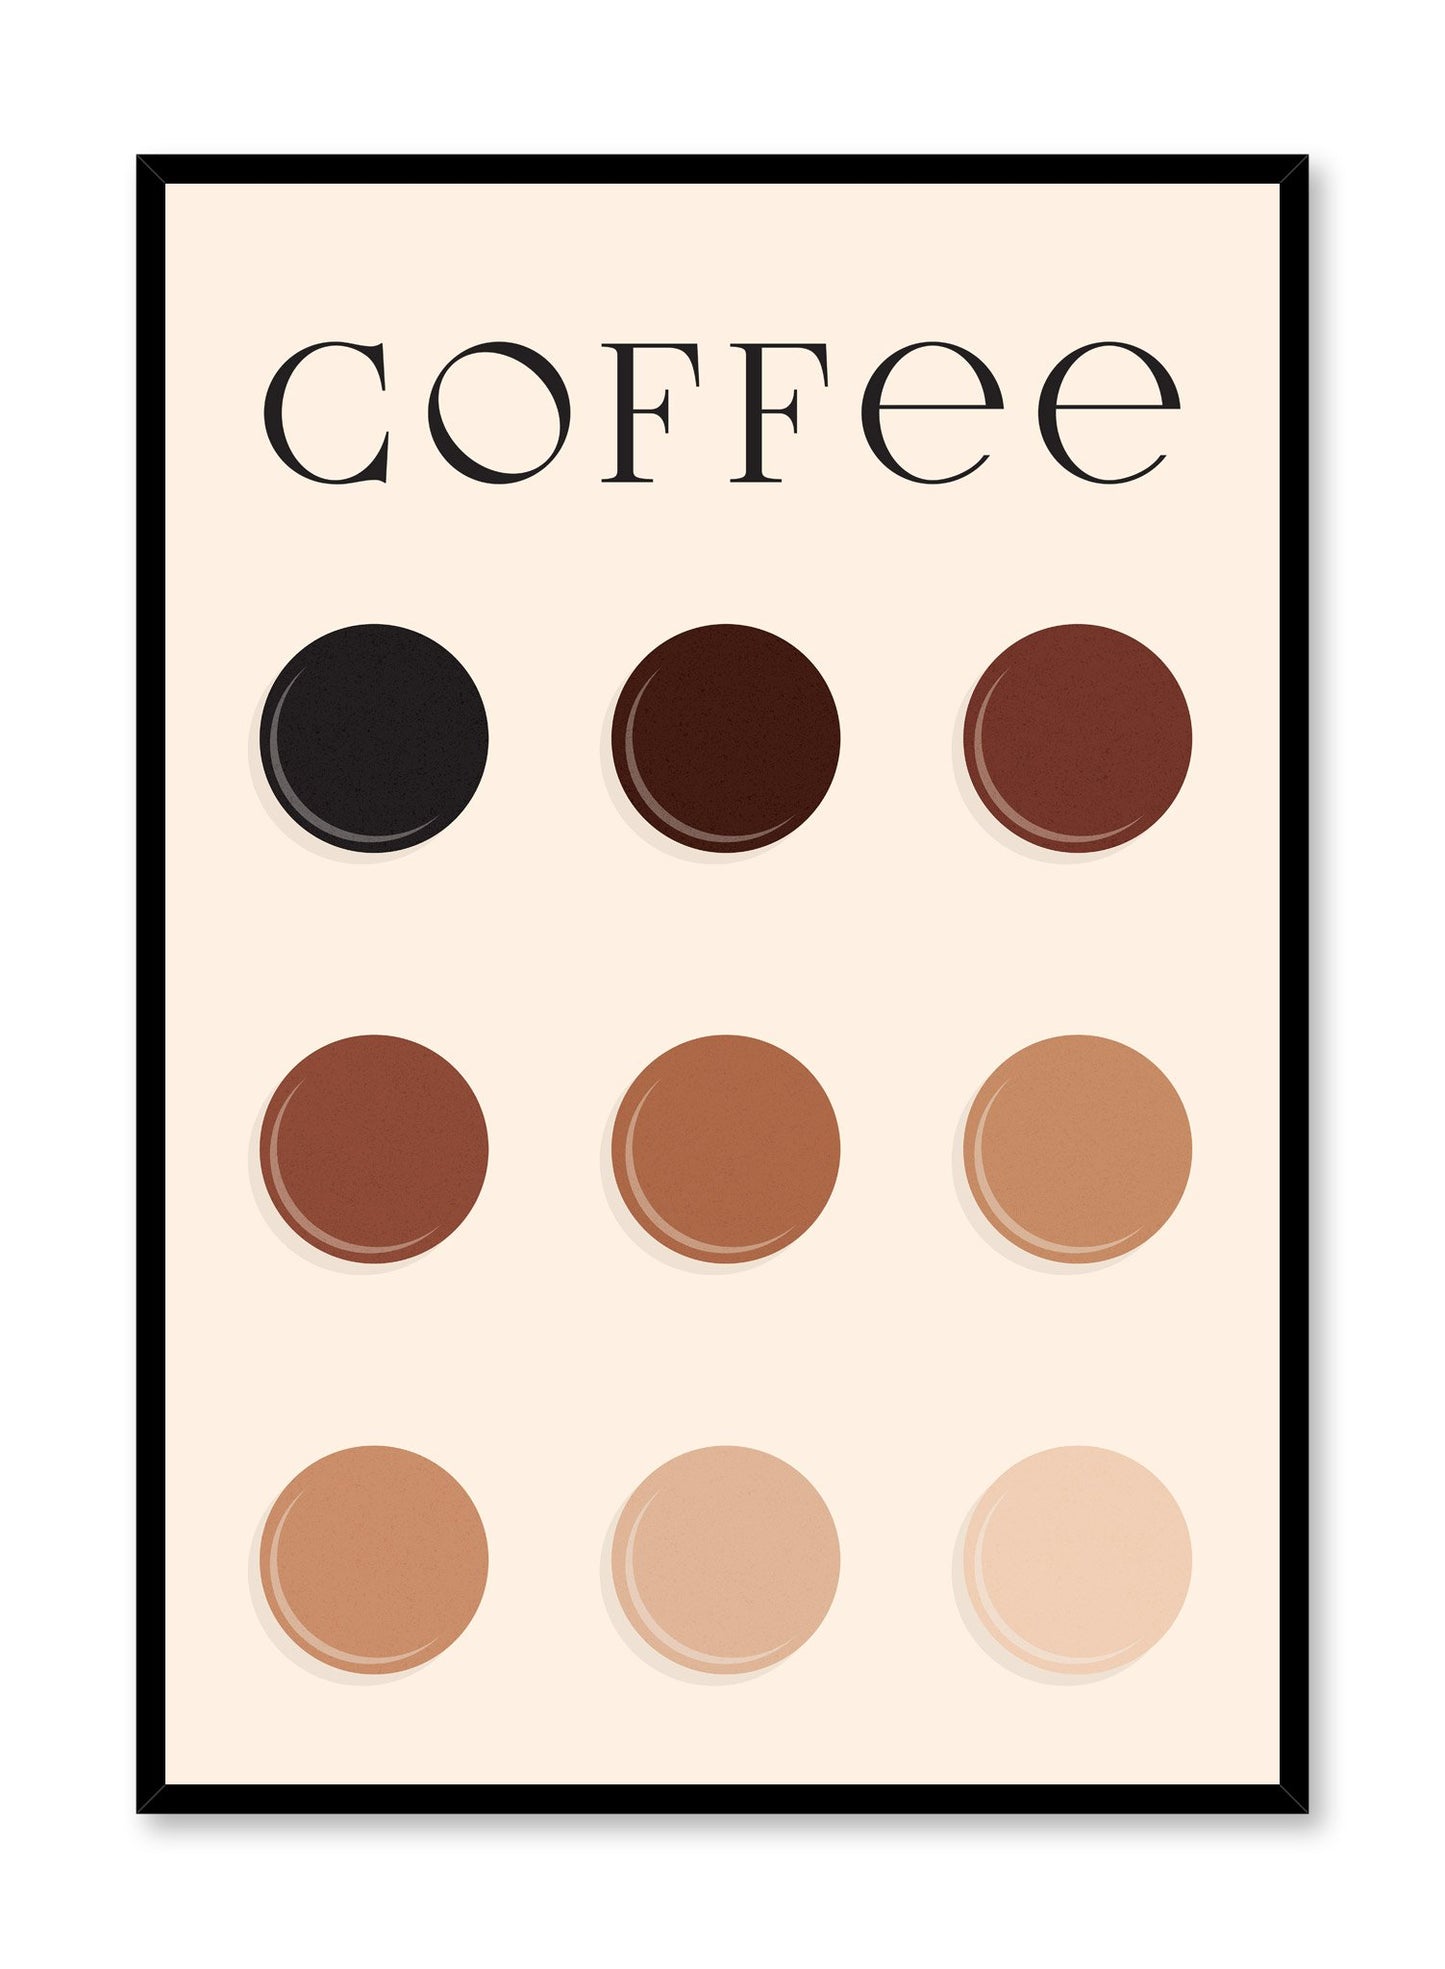 Coffee Gradient is a coffee themed illustration poster by Opposite Wall.